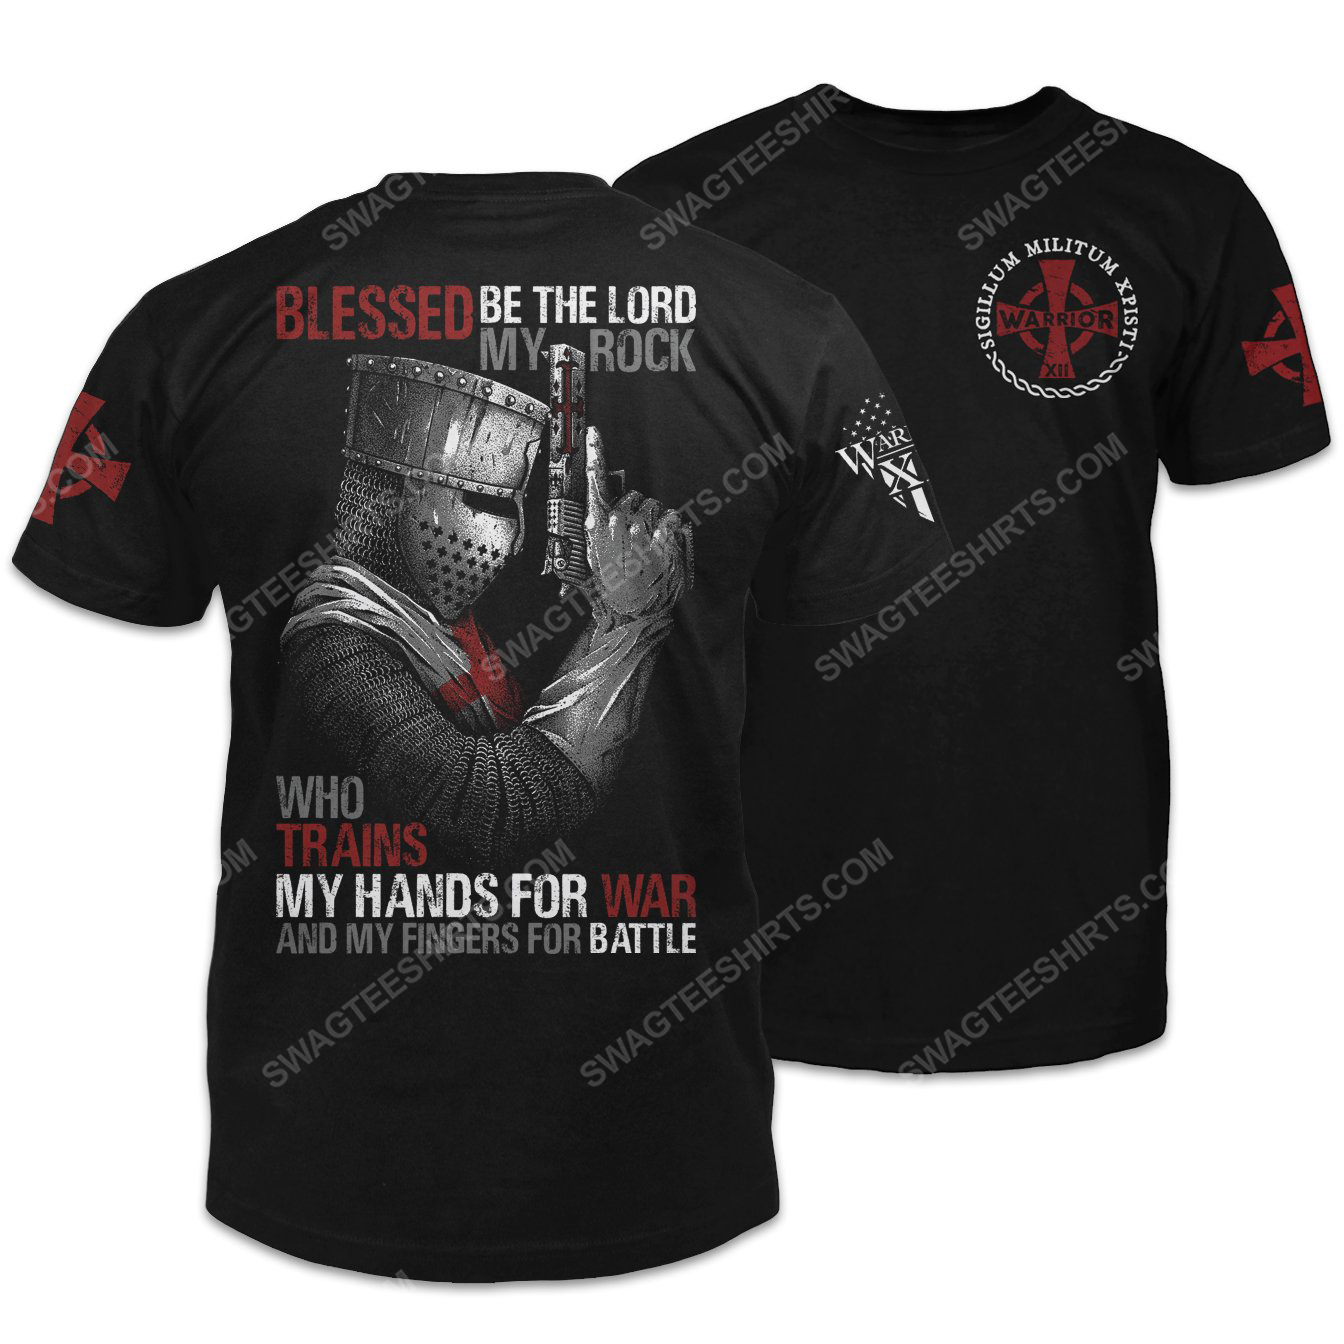 Blessed be the lord my rock who trains my hands for war and my fingers for battle shirt 3(1)